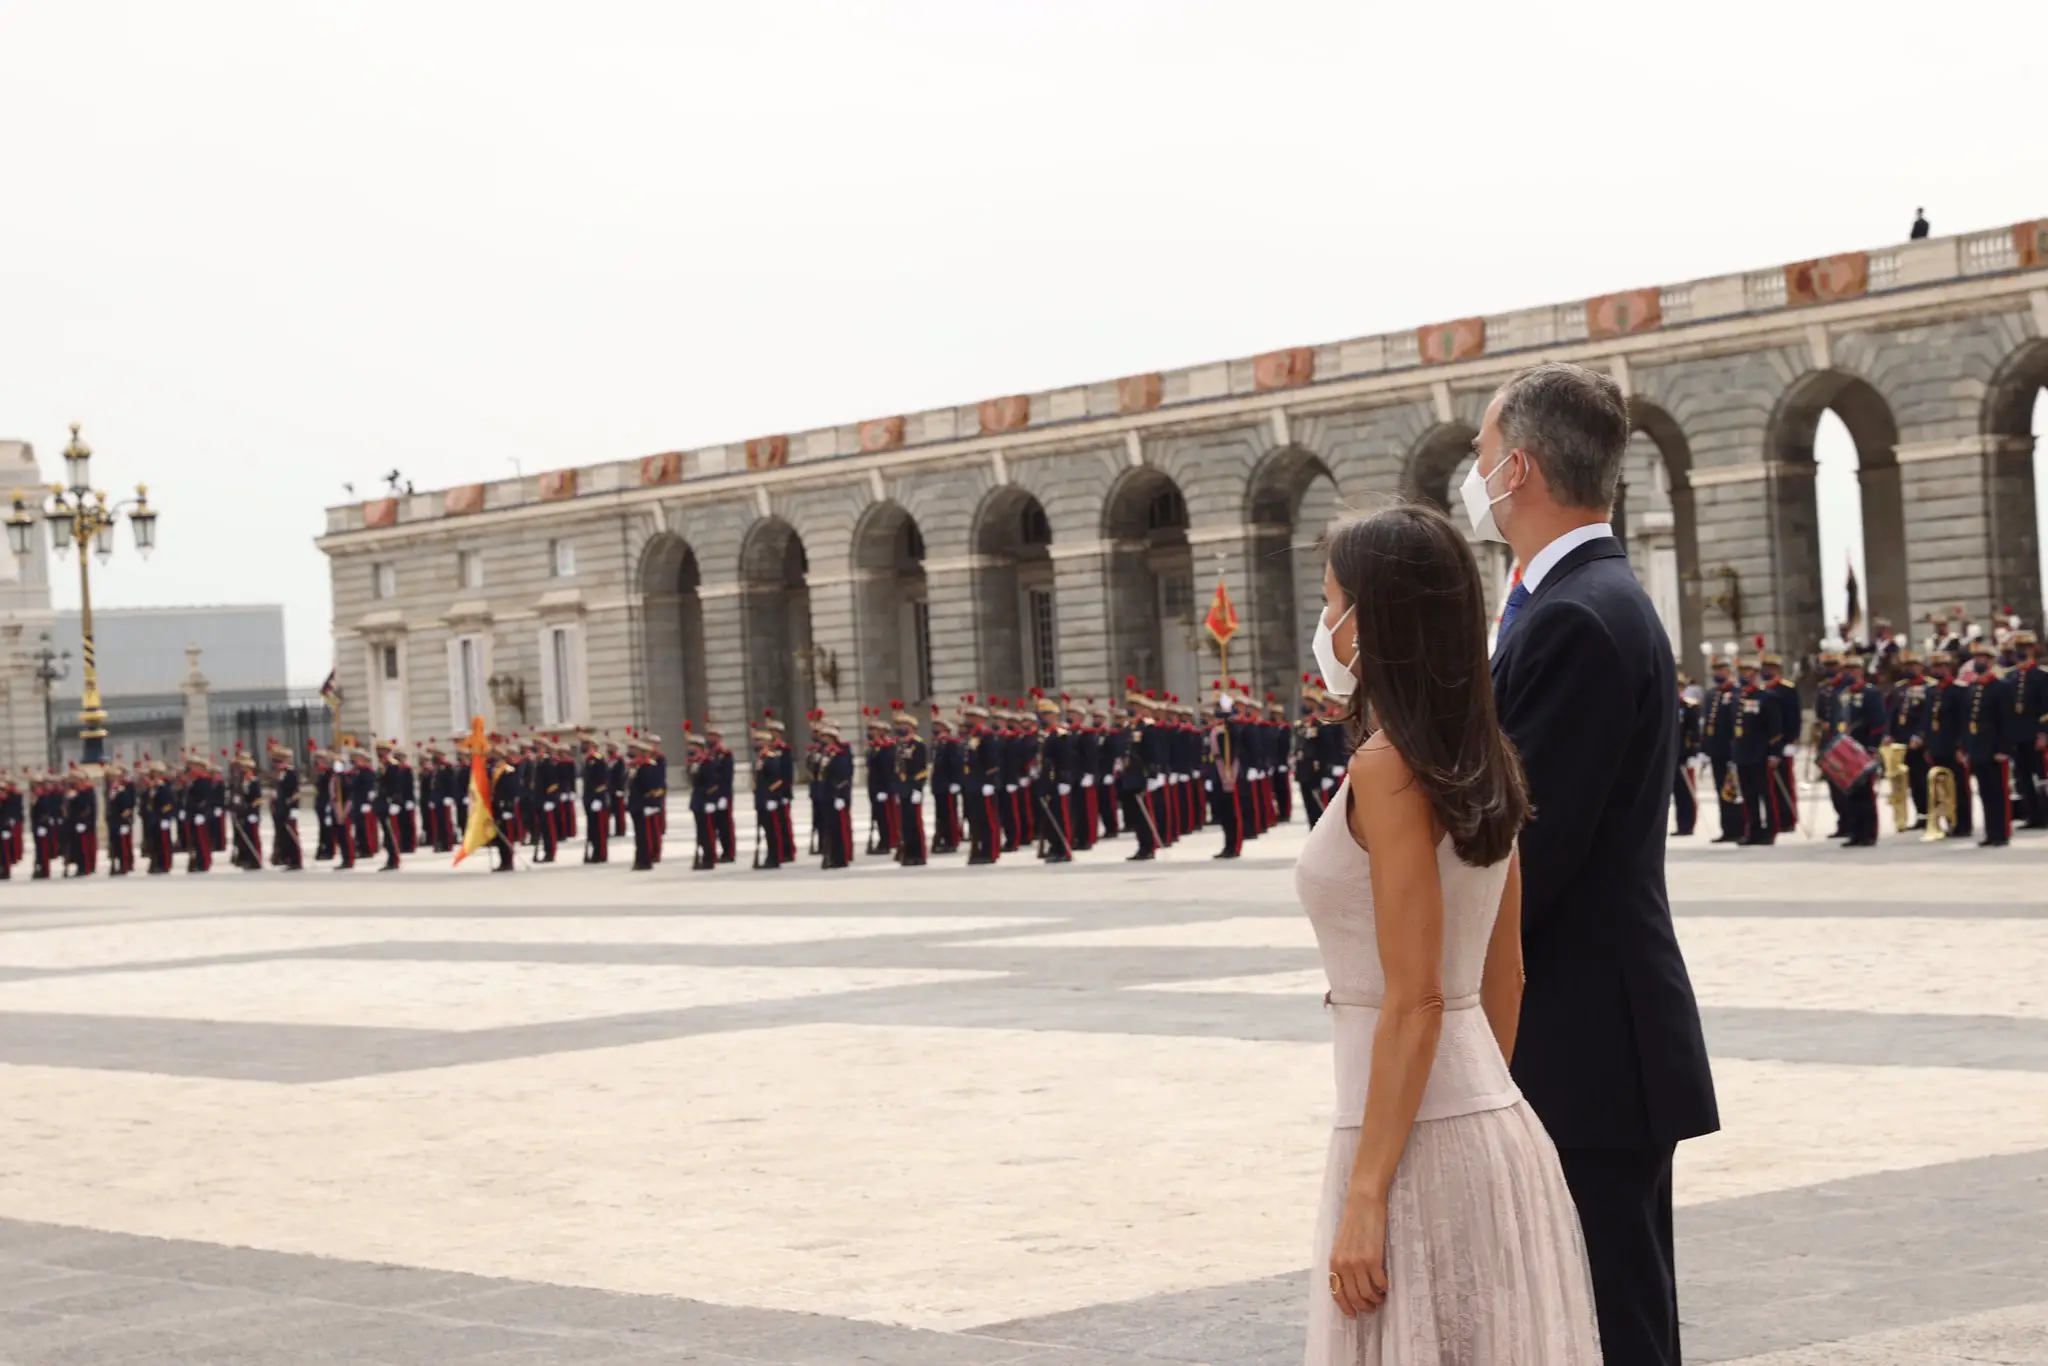 Queen Letizia in Familiar style to welcome South Korean President and First Lady